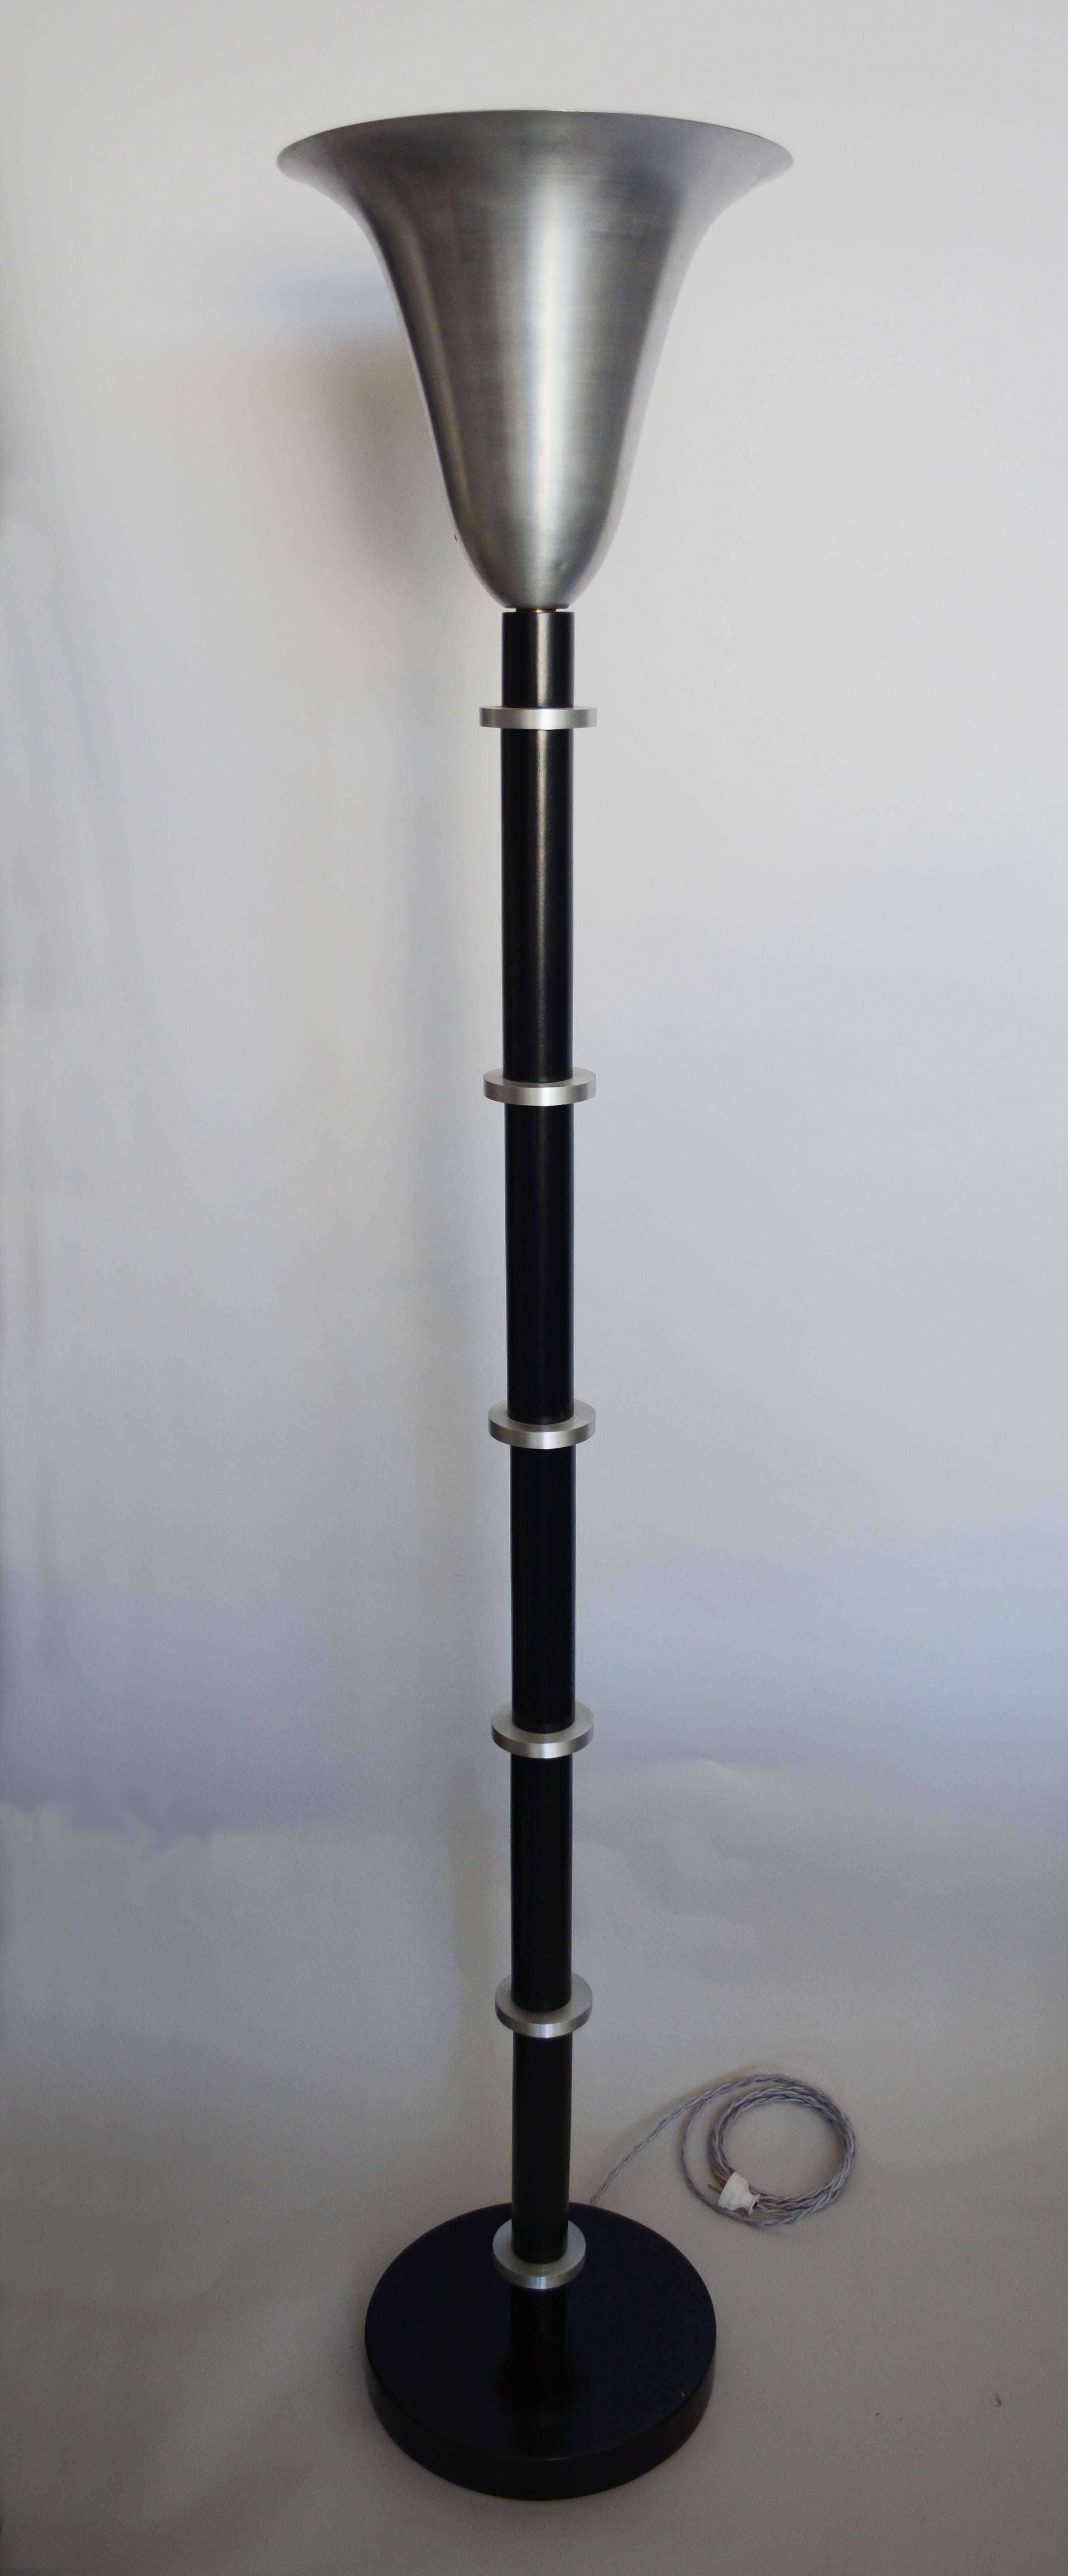 The columns of these torchieres are black lacquer with aluminum discs. The bell shaped shades are aluminum. These have been rewired and have new switches and sockets. The socket takes a mogul base bulb. An adapter can be used in the socket to enable